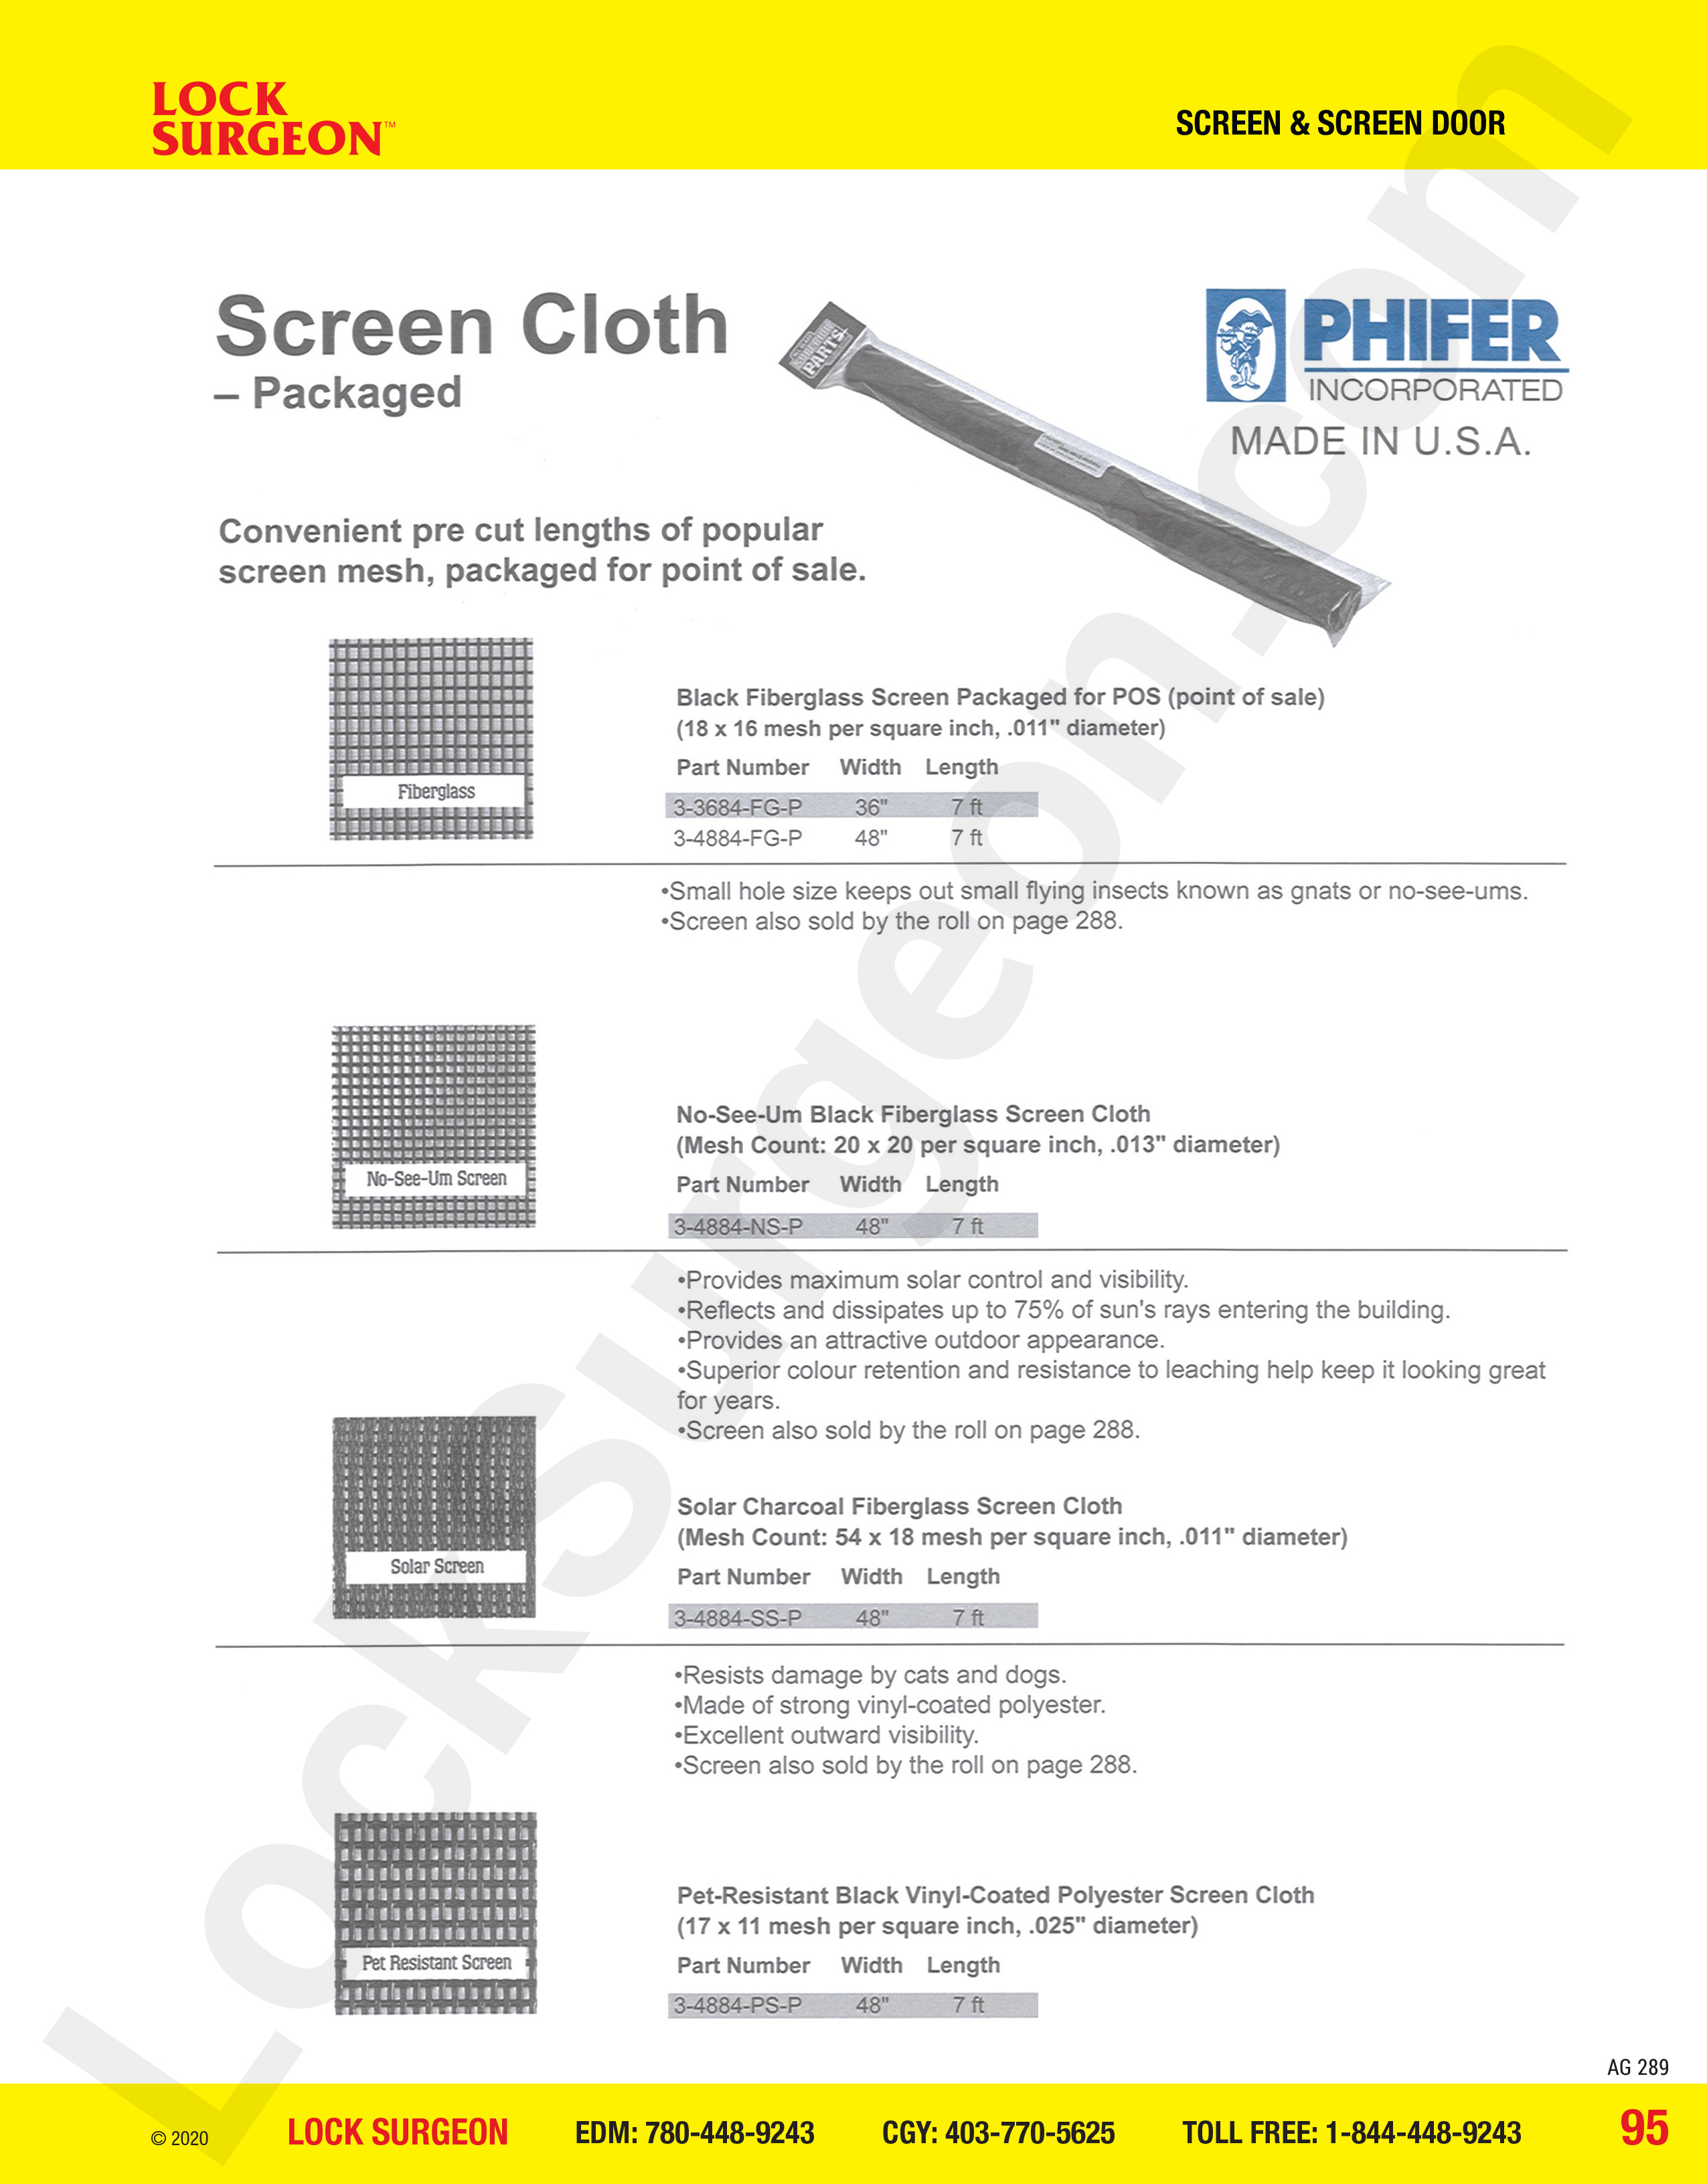 Lock Surgeon Edmonton South Phifer screen cloth packages in fiberglass or coated polyester.